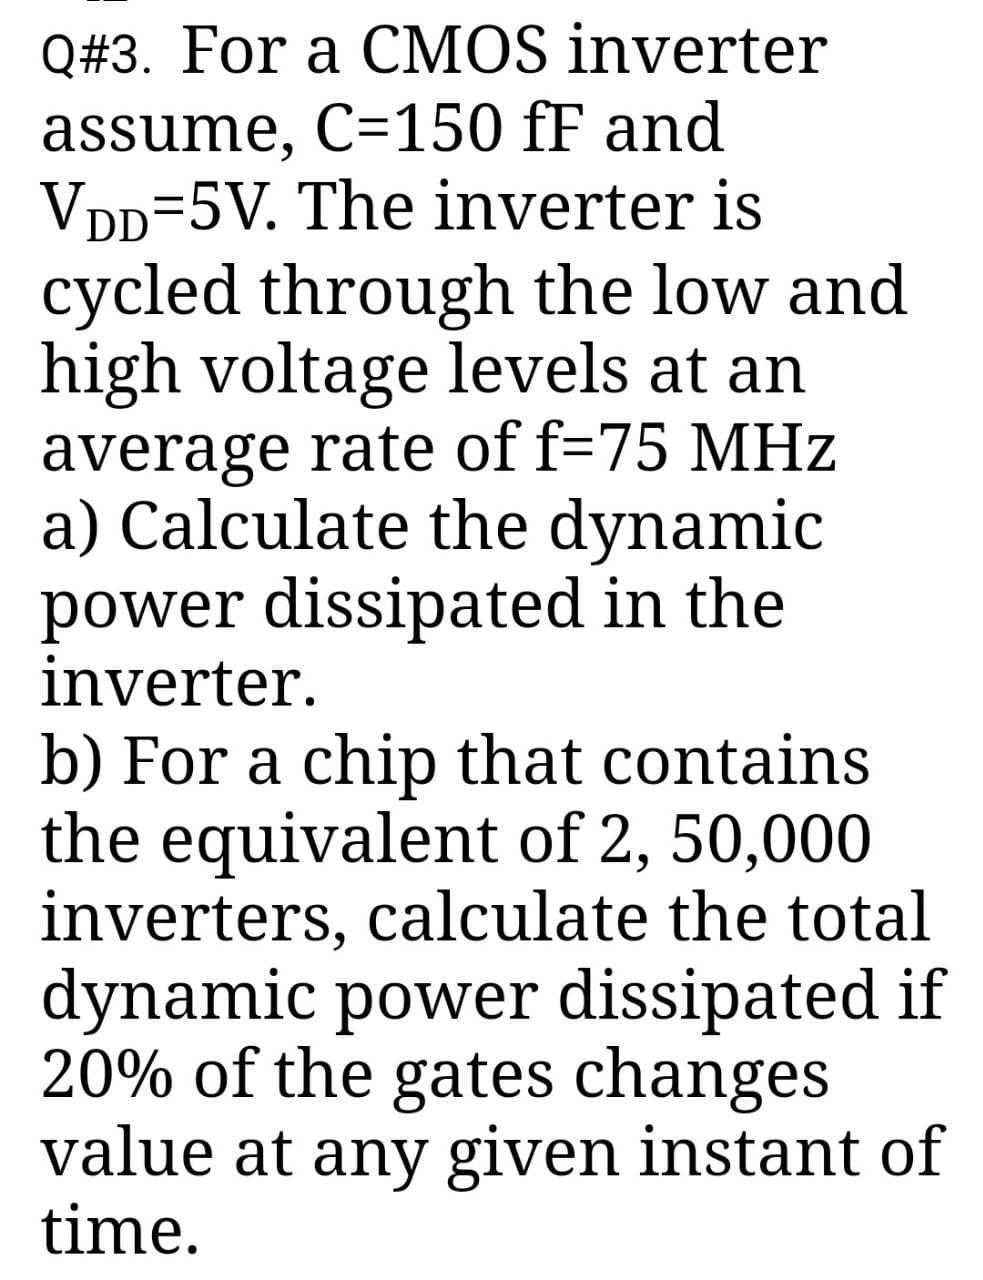 Q#3. For a CMOS inverter
assume, C=150 fF and
VDD=5V. The inverter is
cycled through the low and
high voltage levels at an
average rate of f=75 MHz
a) Calculate the dynamic
power dissipated in the
inverter.
b) For a chip that contains
the equivalent of 2, 50,000
inverters, calculate the total
dynamic power dissipated if
20% of the gates changes
value at any given instant of
time.